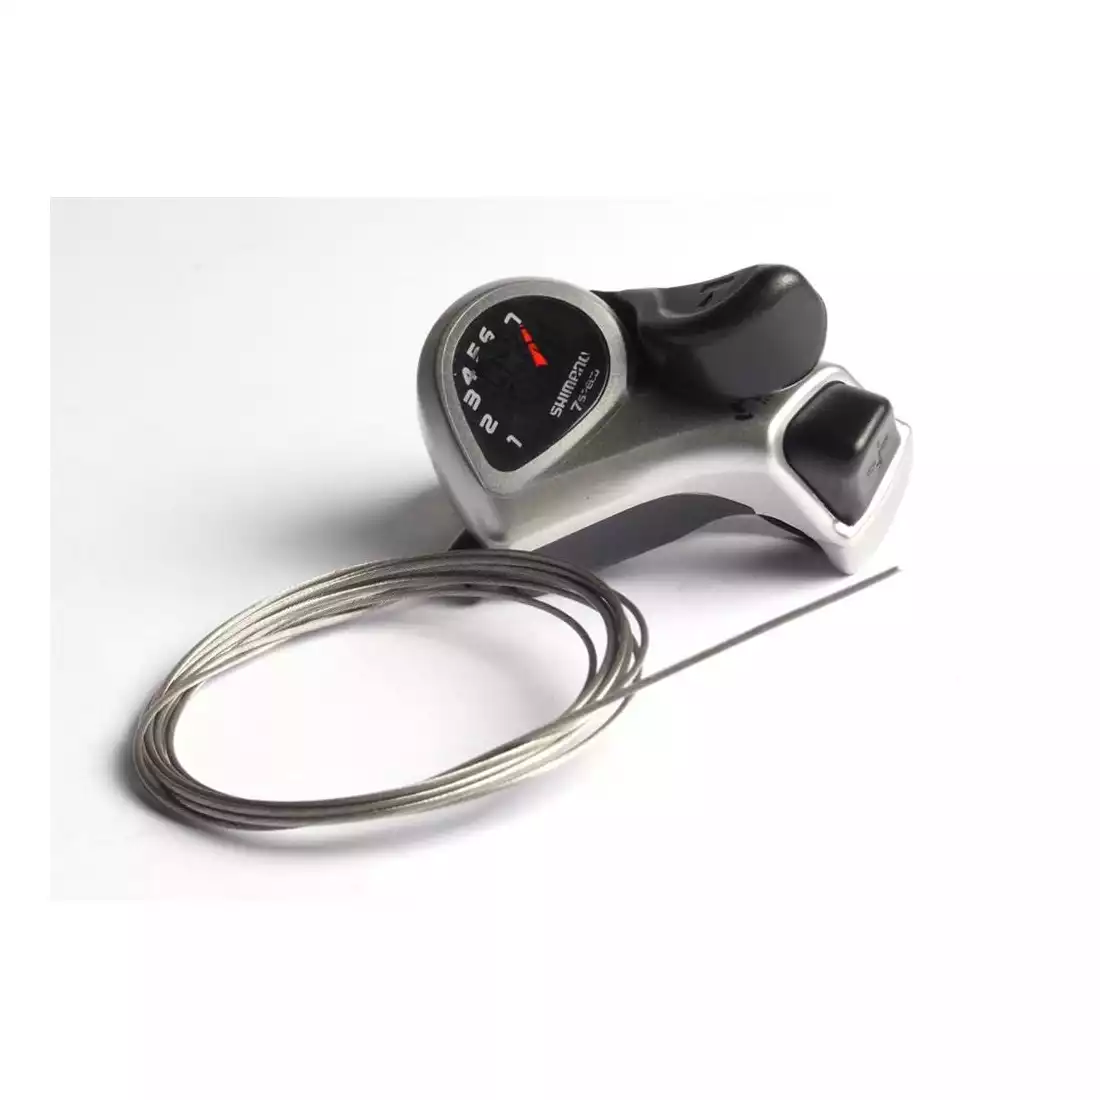 SHIMANO SL-TX50 left bicycle lever, 7-speed